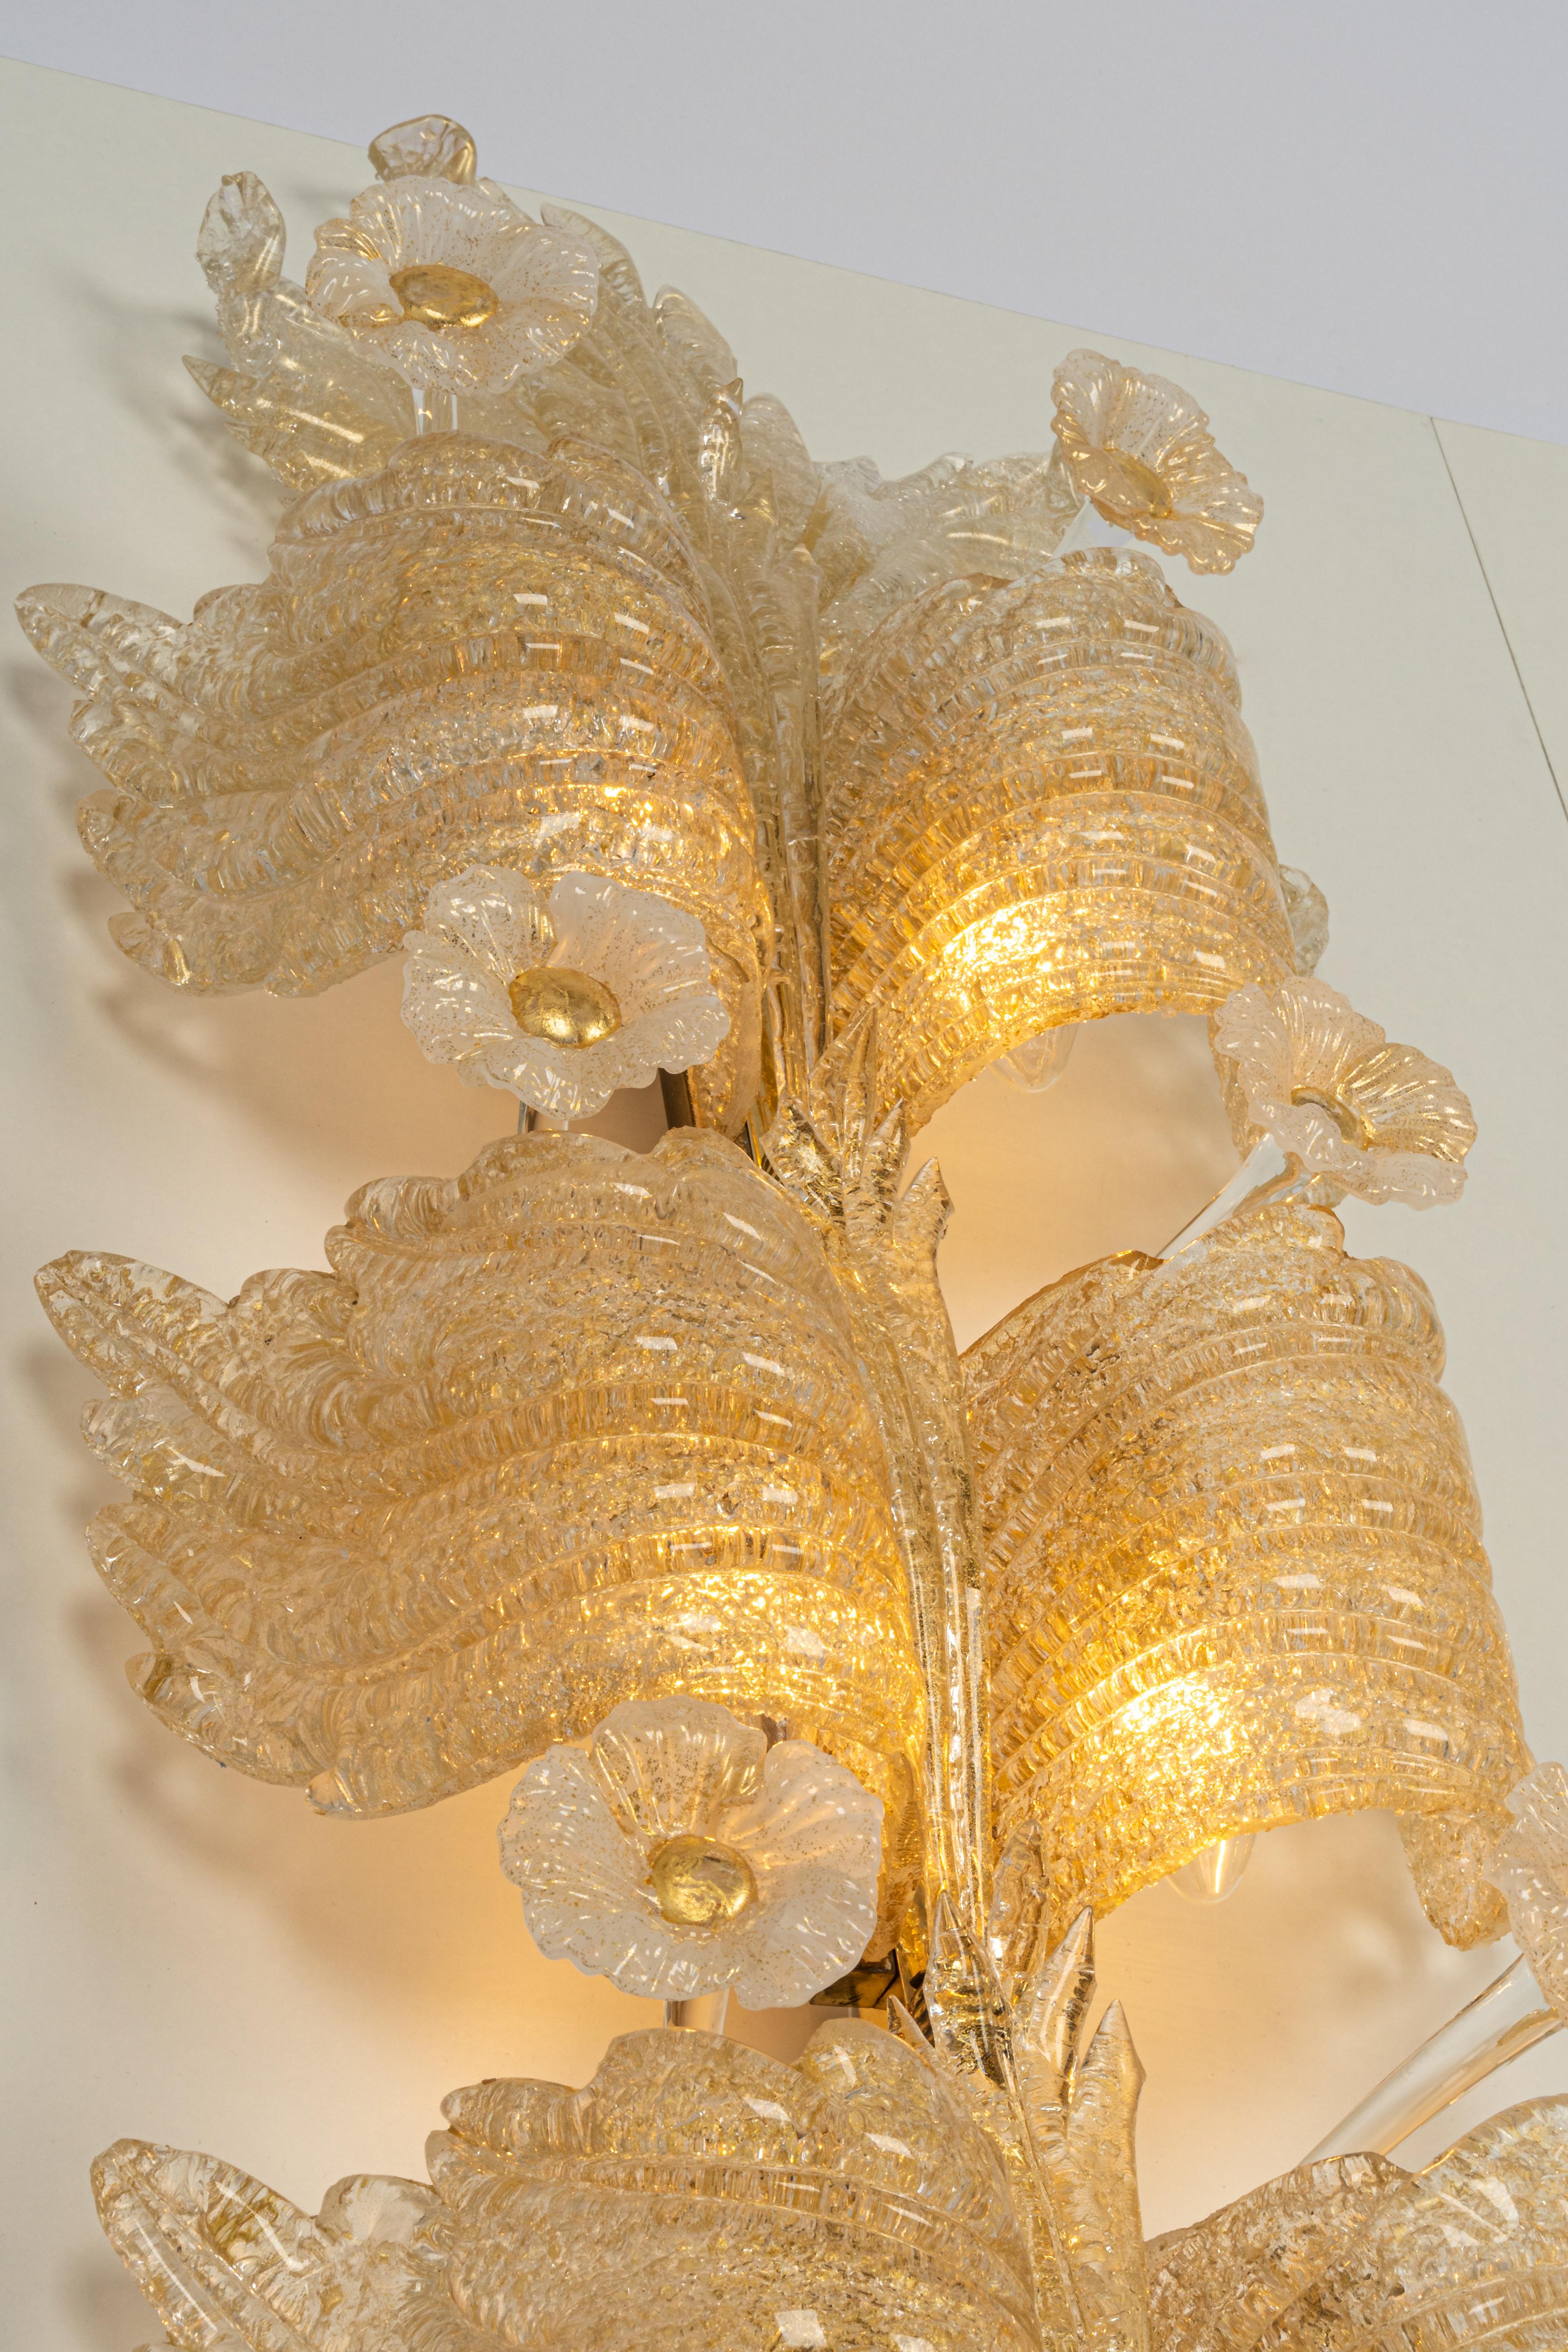 Italian Pair of Extra Large Murano Glass Wall Sconces by Barovier & Toso, Italy, 1970s